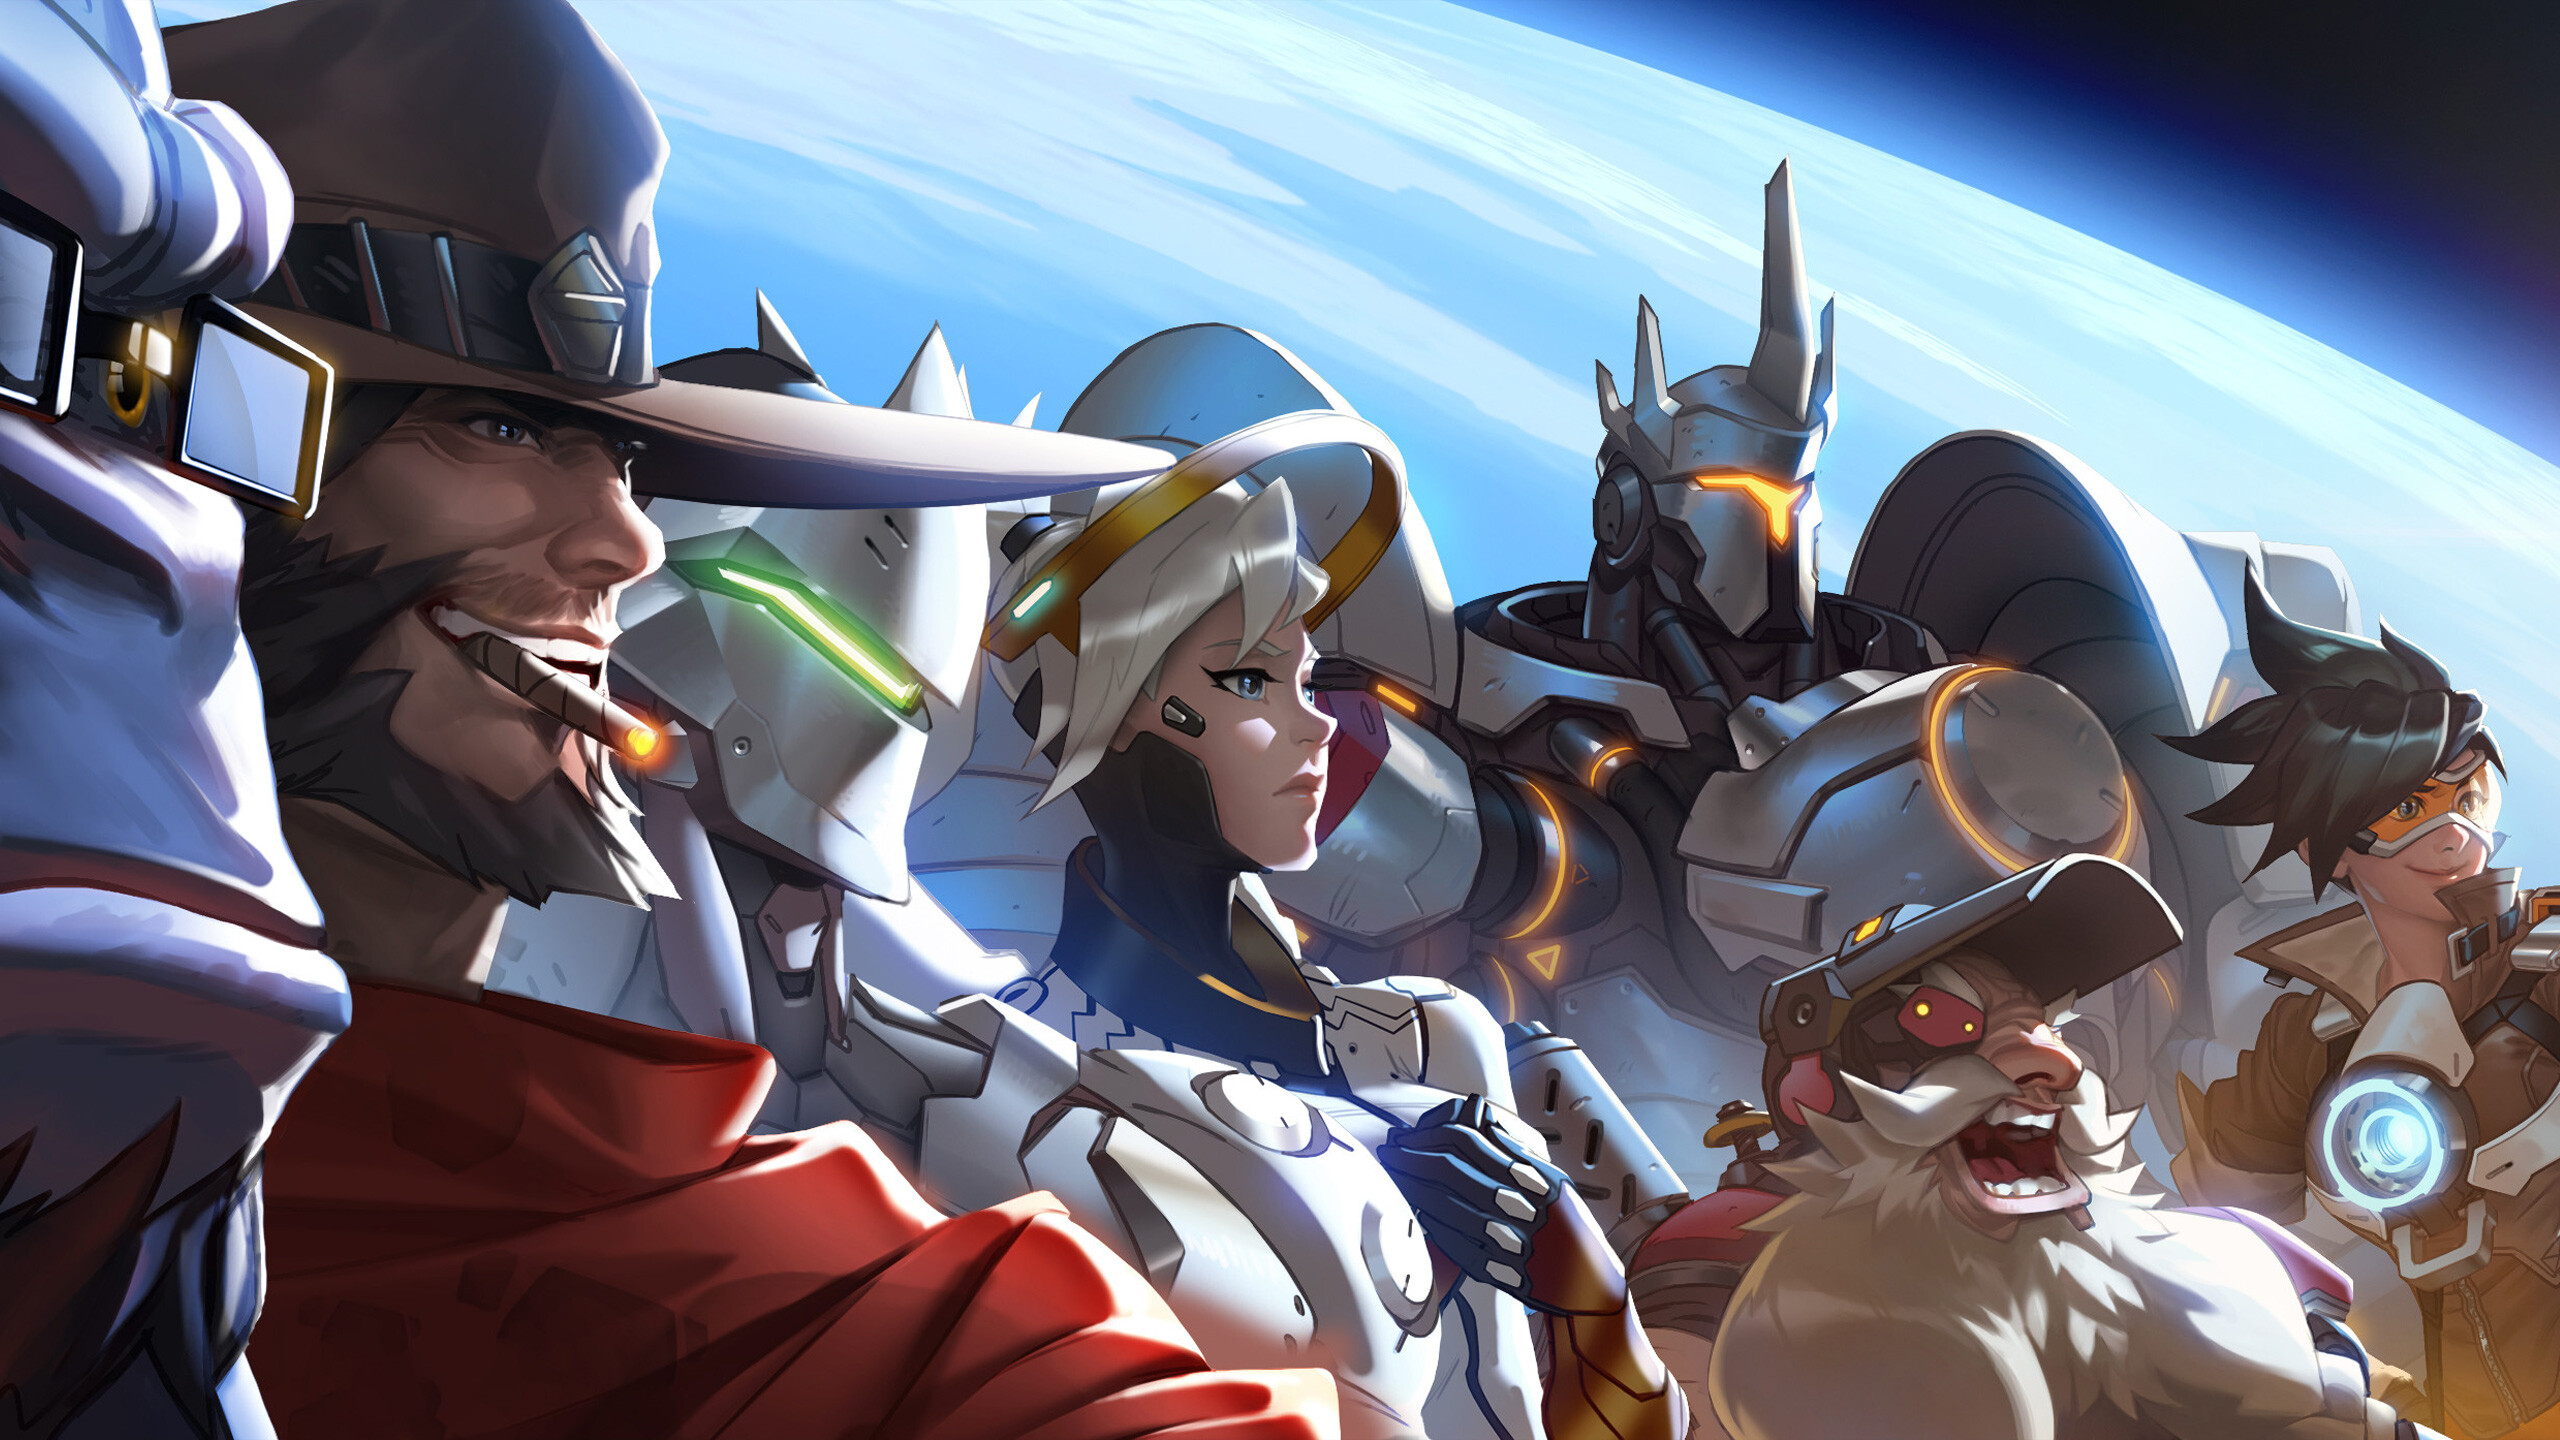 40+ Overwatch Wallpapers: HD, 4K, 5K for PC and Mobile | Download free  images for iPhone, Android